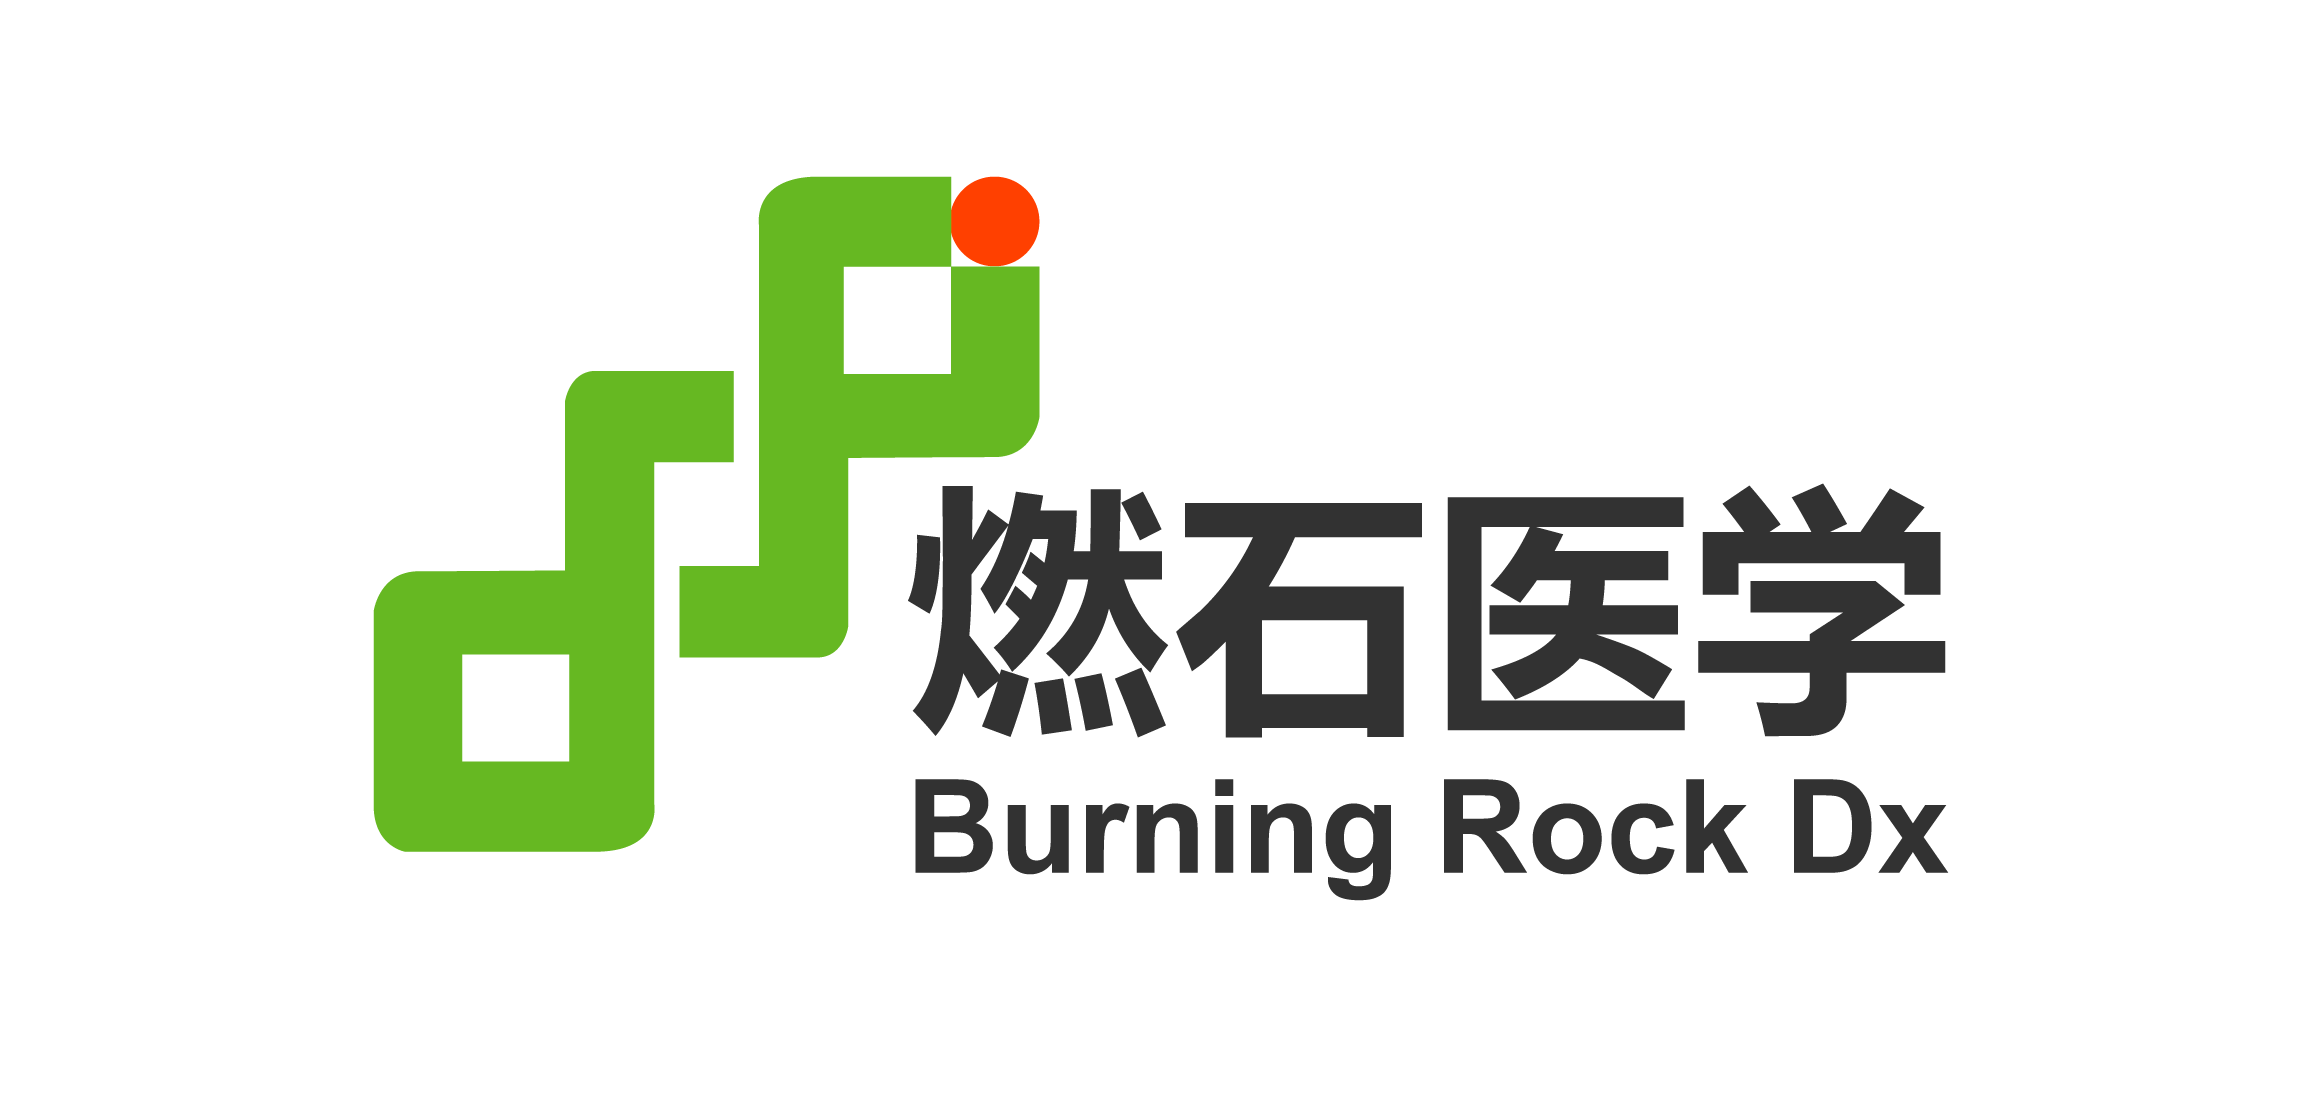 Burning Rock Reports Fourth Quarter and Full Year 2021 Financial Results